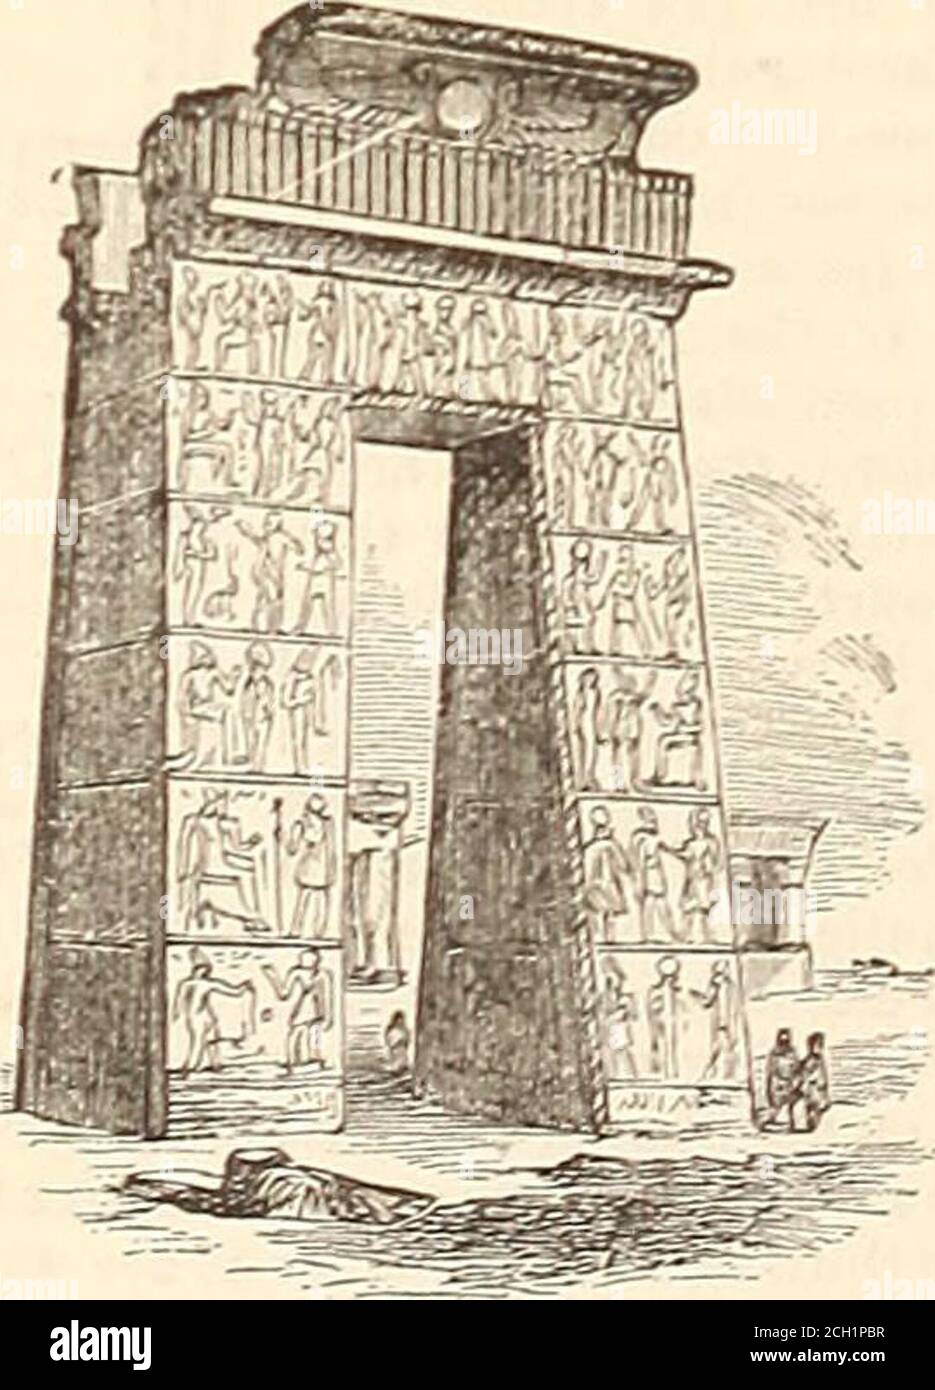 . A comprehensive dictionary of the Bible . Sculptured Gateway at Karnak.—From a photograph.—Ayre.) Luxor and Karnak, the latter being of itself acity of temples. The approach to Karnak fromthe S. is marked by a series of majestic gateways and towers, which were the appendages of latertimes to the original structure. The temple prop-erly faces the river, i. e. toward the N. W. Thecourts and propylaea connected with this structureoccupy a space nearly 1,800 feet square, and thebuildings represent almost every dynasty of Egypt,liiiin Soortasen I. to Itoleni) Euergetes I. Everything pertaining to Stock Photo